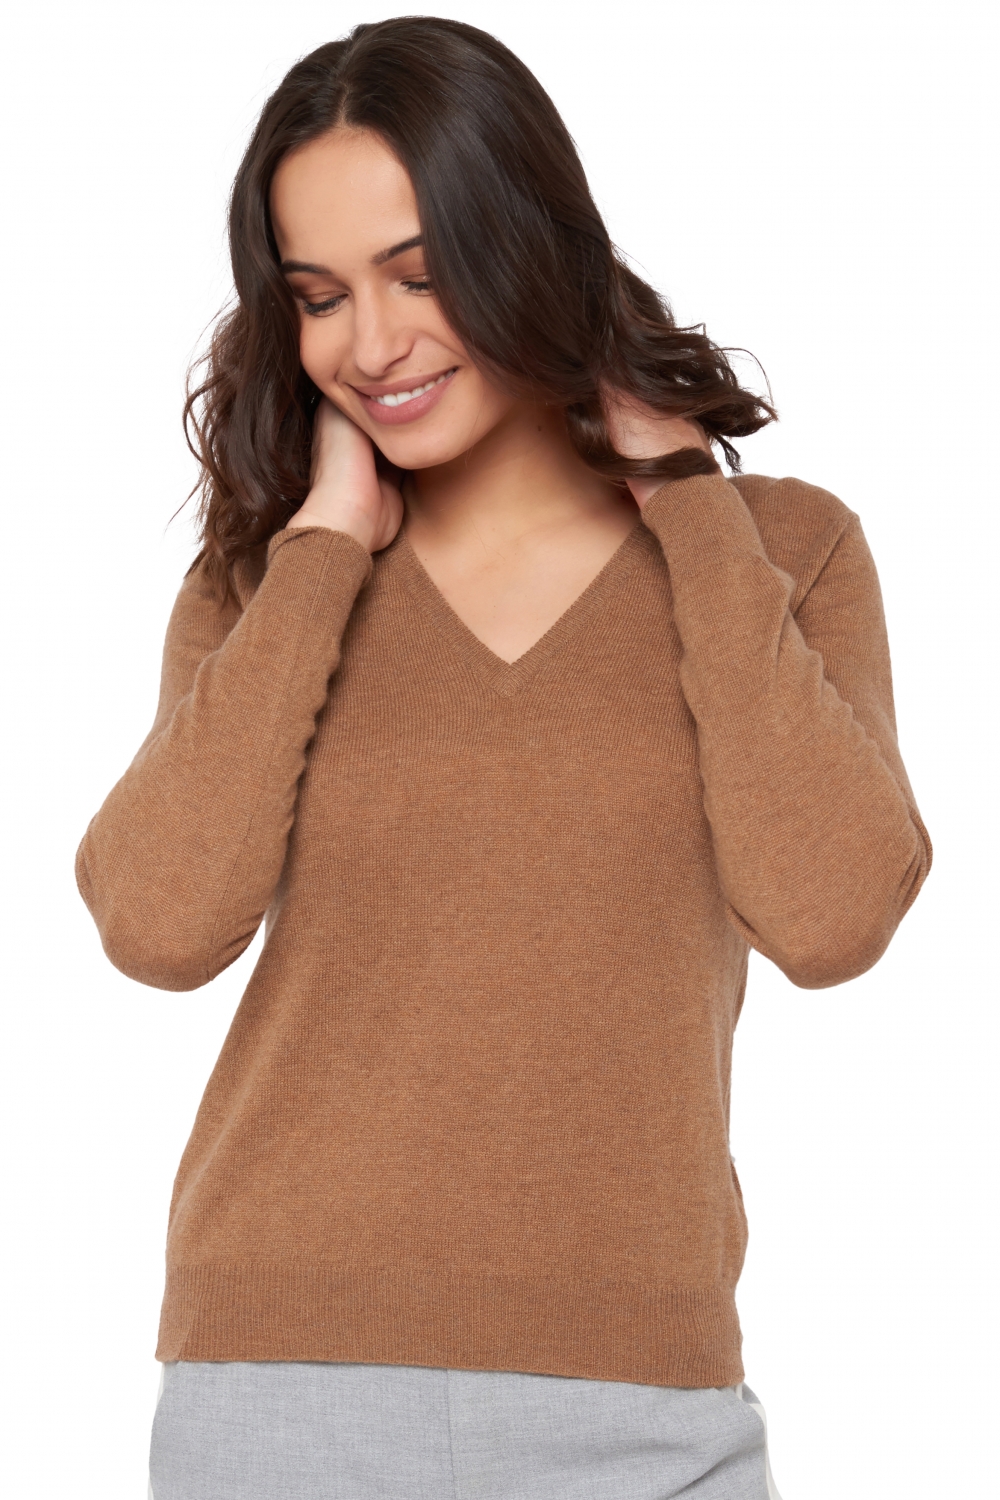 Cashmere ladies timeless classics faustine camel chine 4xl